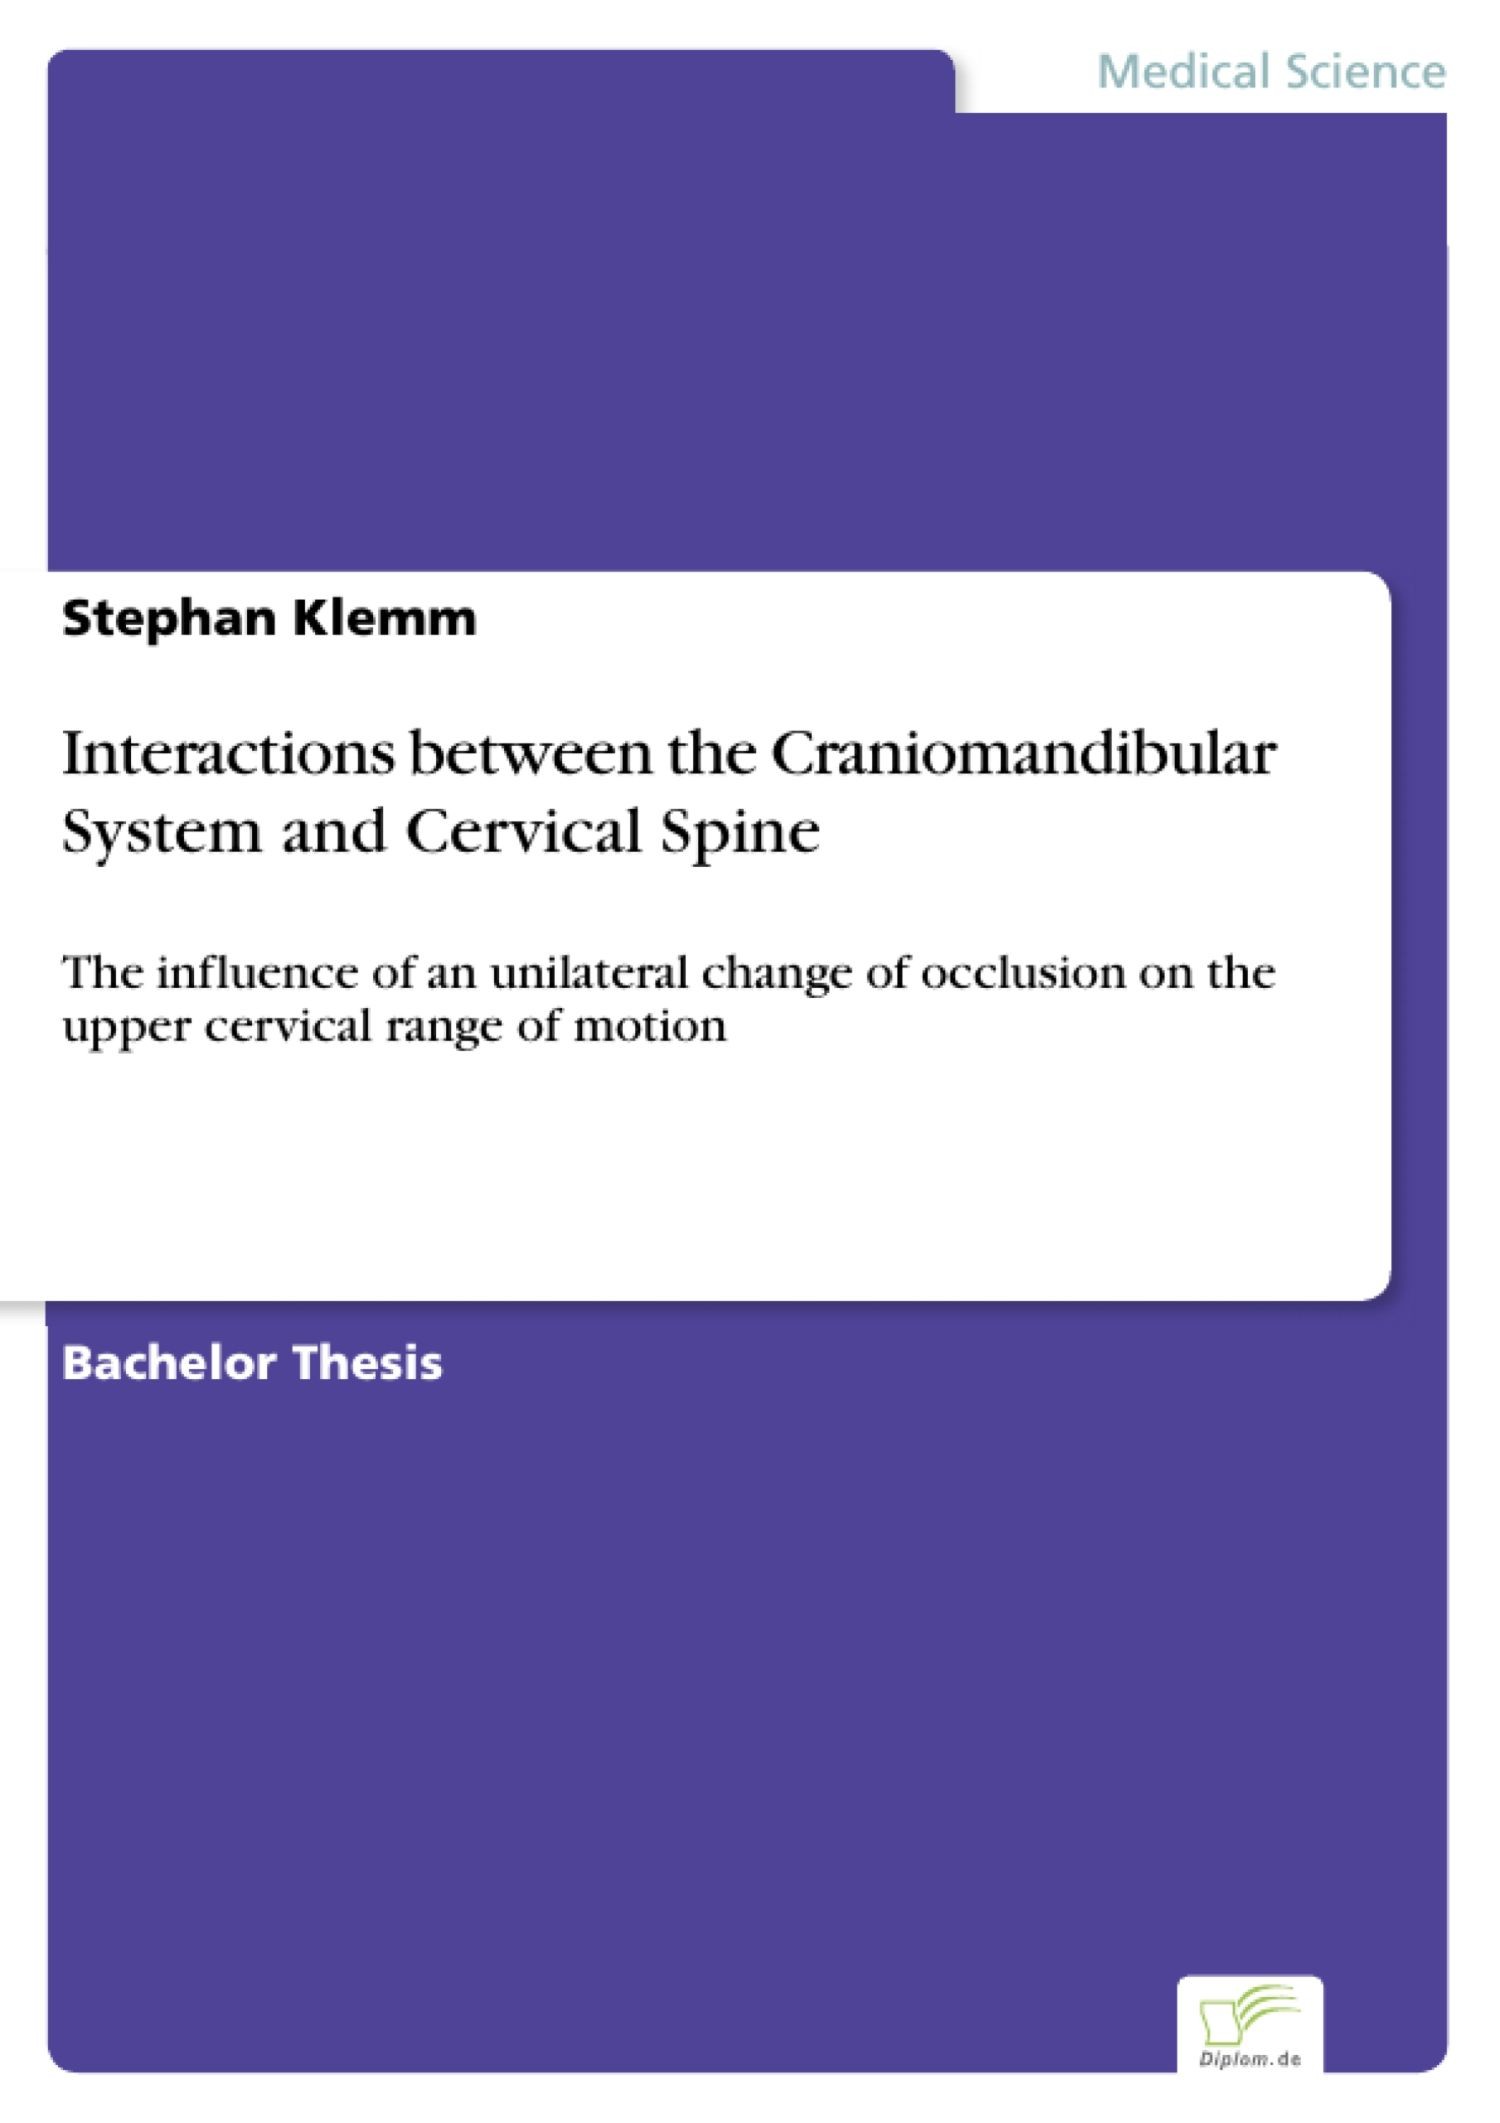 Interactions between the Craniomandibular System and Cervical Spine